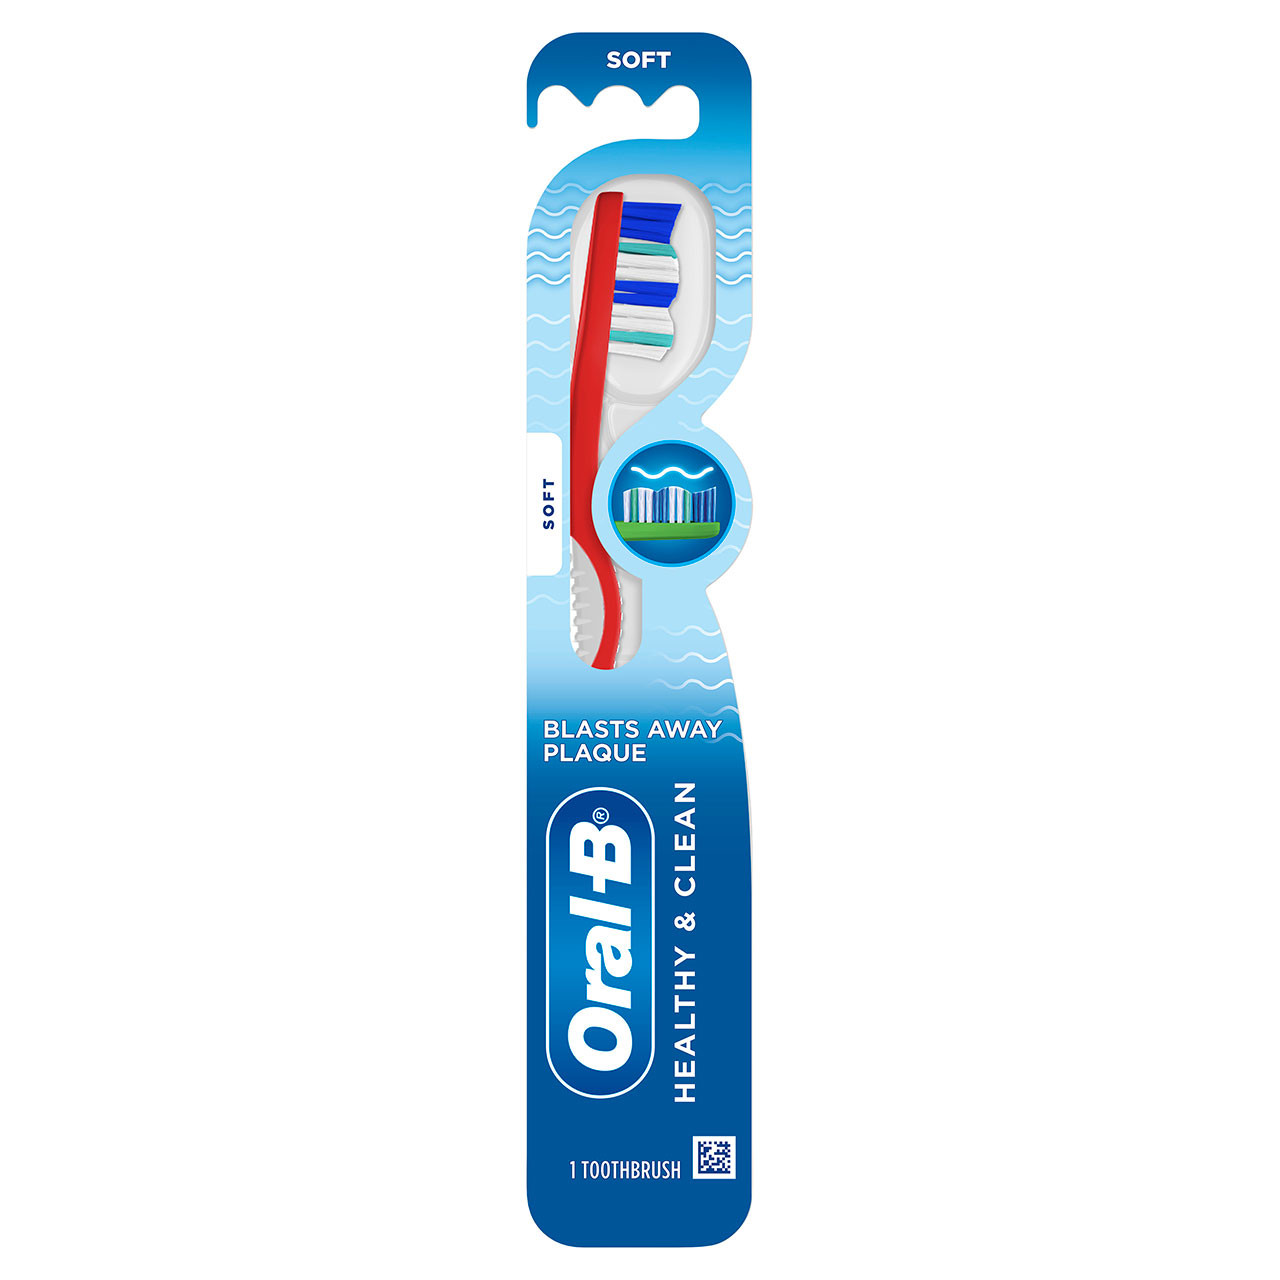 Oral-B Fresh & Clean Toothbrush, Soft, Extra Value 6x Pack - 6 toothbrushes